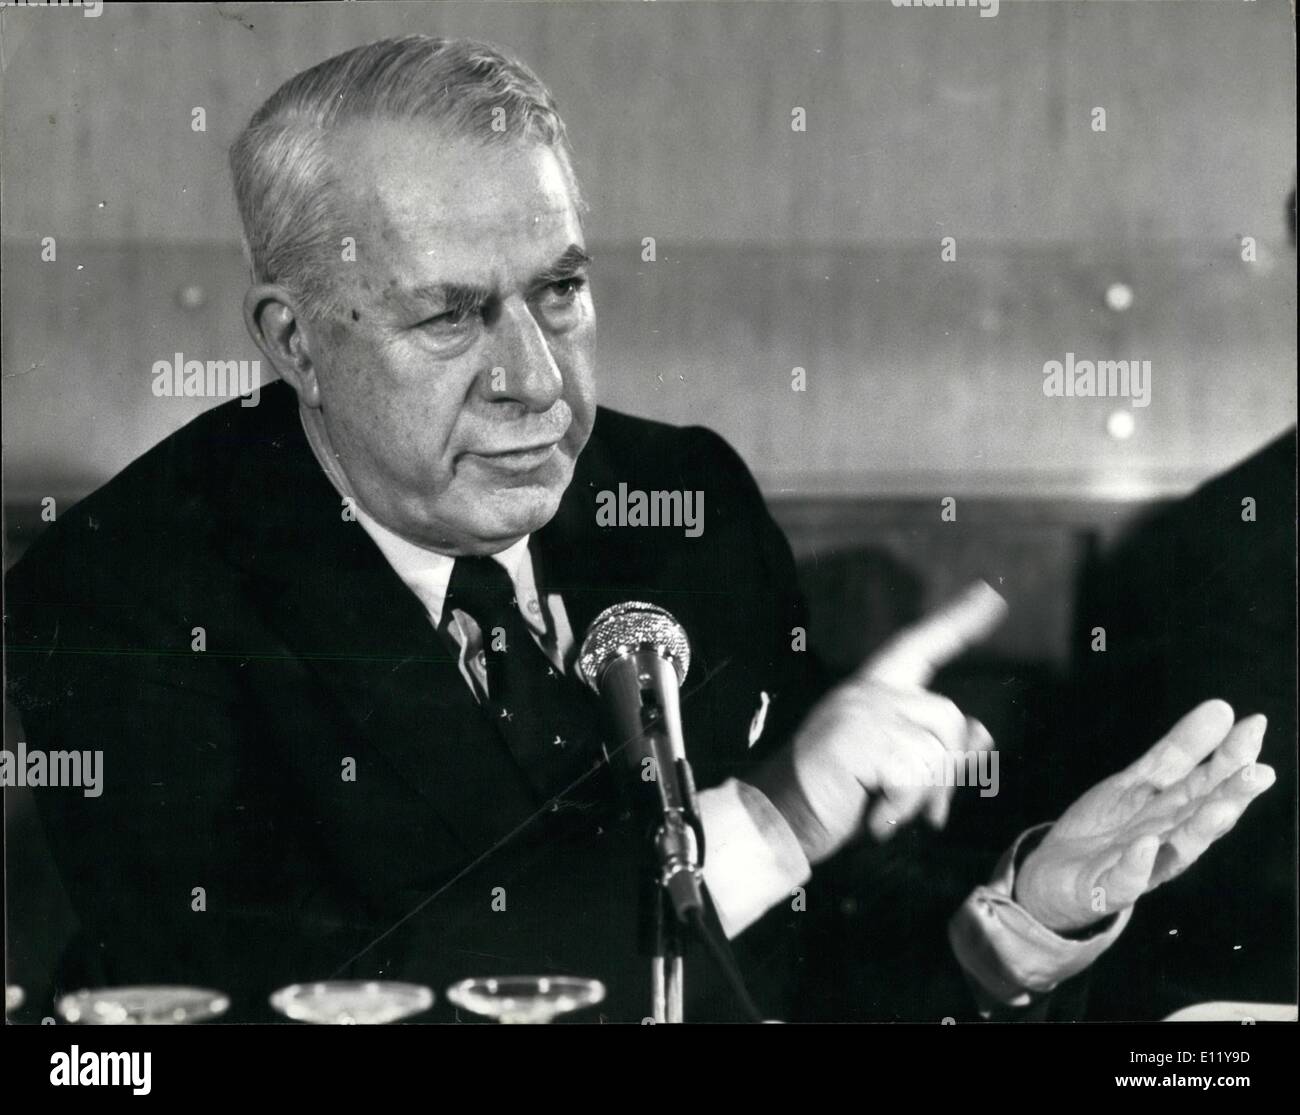 Dec. 12, 1980 - BSC CHAIRMAN IAN MACGREGOR HOLDS PRESS CONFERENCE. At the British Steel Corporation's press conference in London today. The Chairman, Mr Ian Macgregor, said that BSC's Corporate Plan calls for a out in the Corporation's manned liquid steel making capacity from 15 million tonnes to 14,4 million tonnes a year, and a further reduction in personnel of at least 20,000. PHOTO SHOWS: BSC's Chairman Mr Ian MacGregor pictured during his press conference in London today. Stock Photo